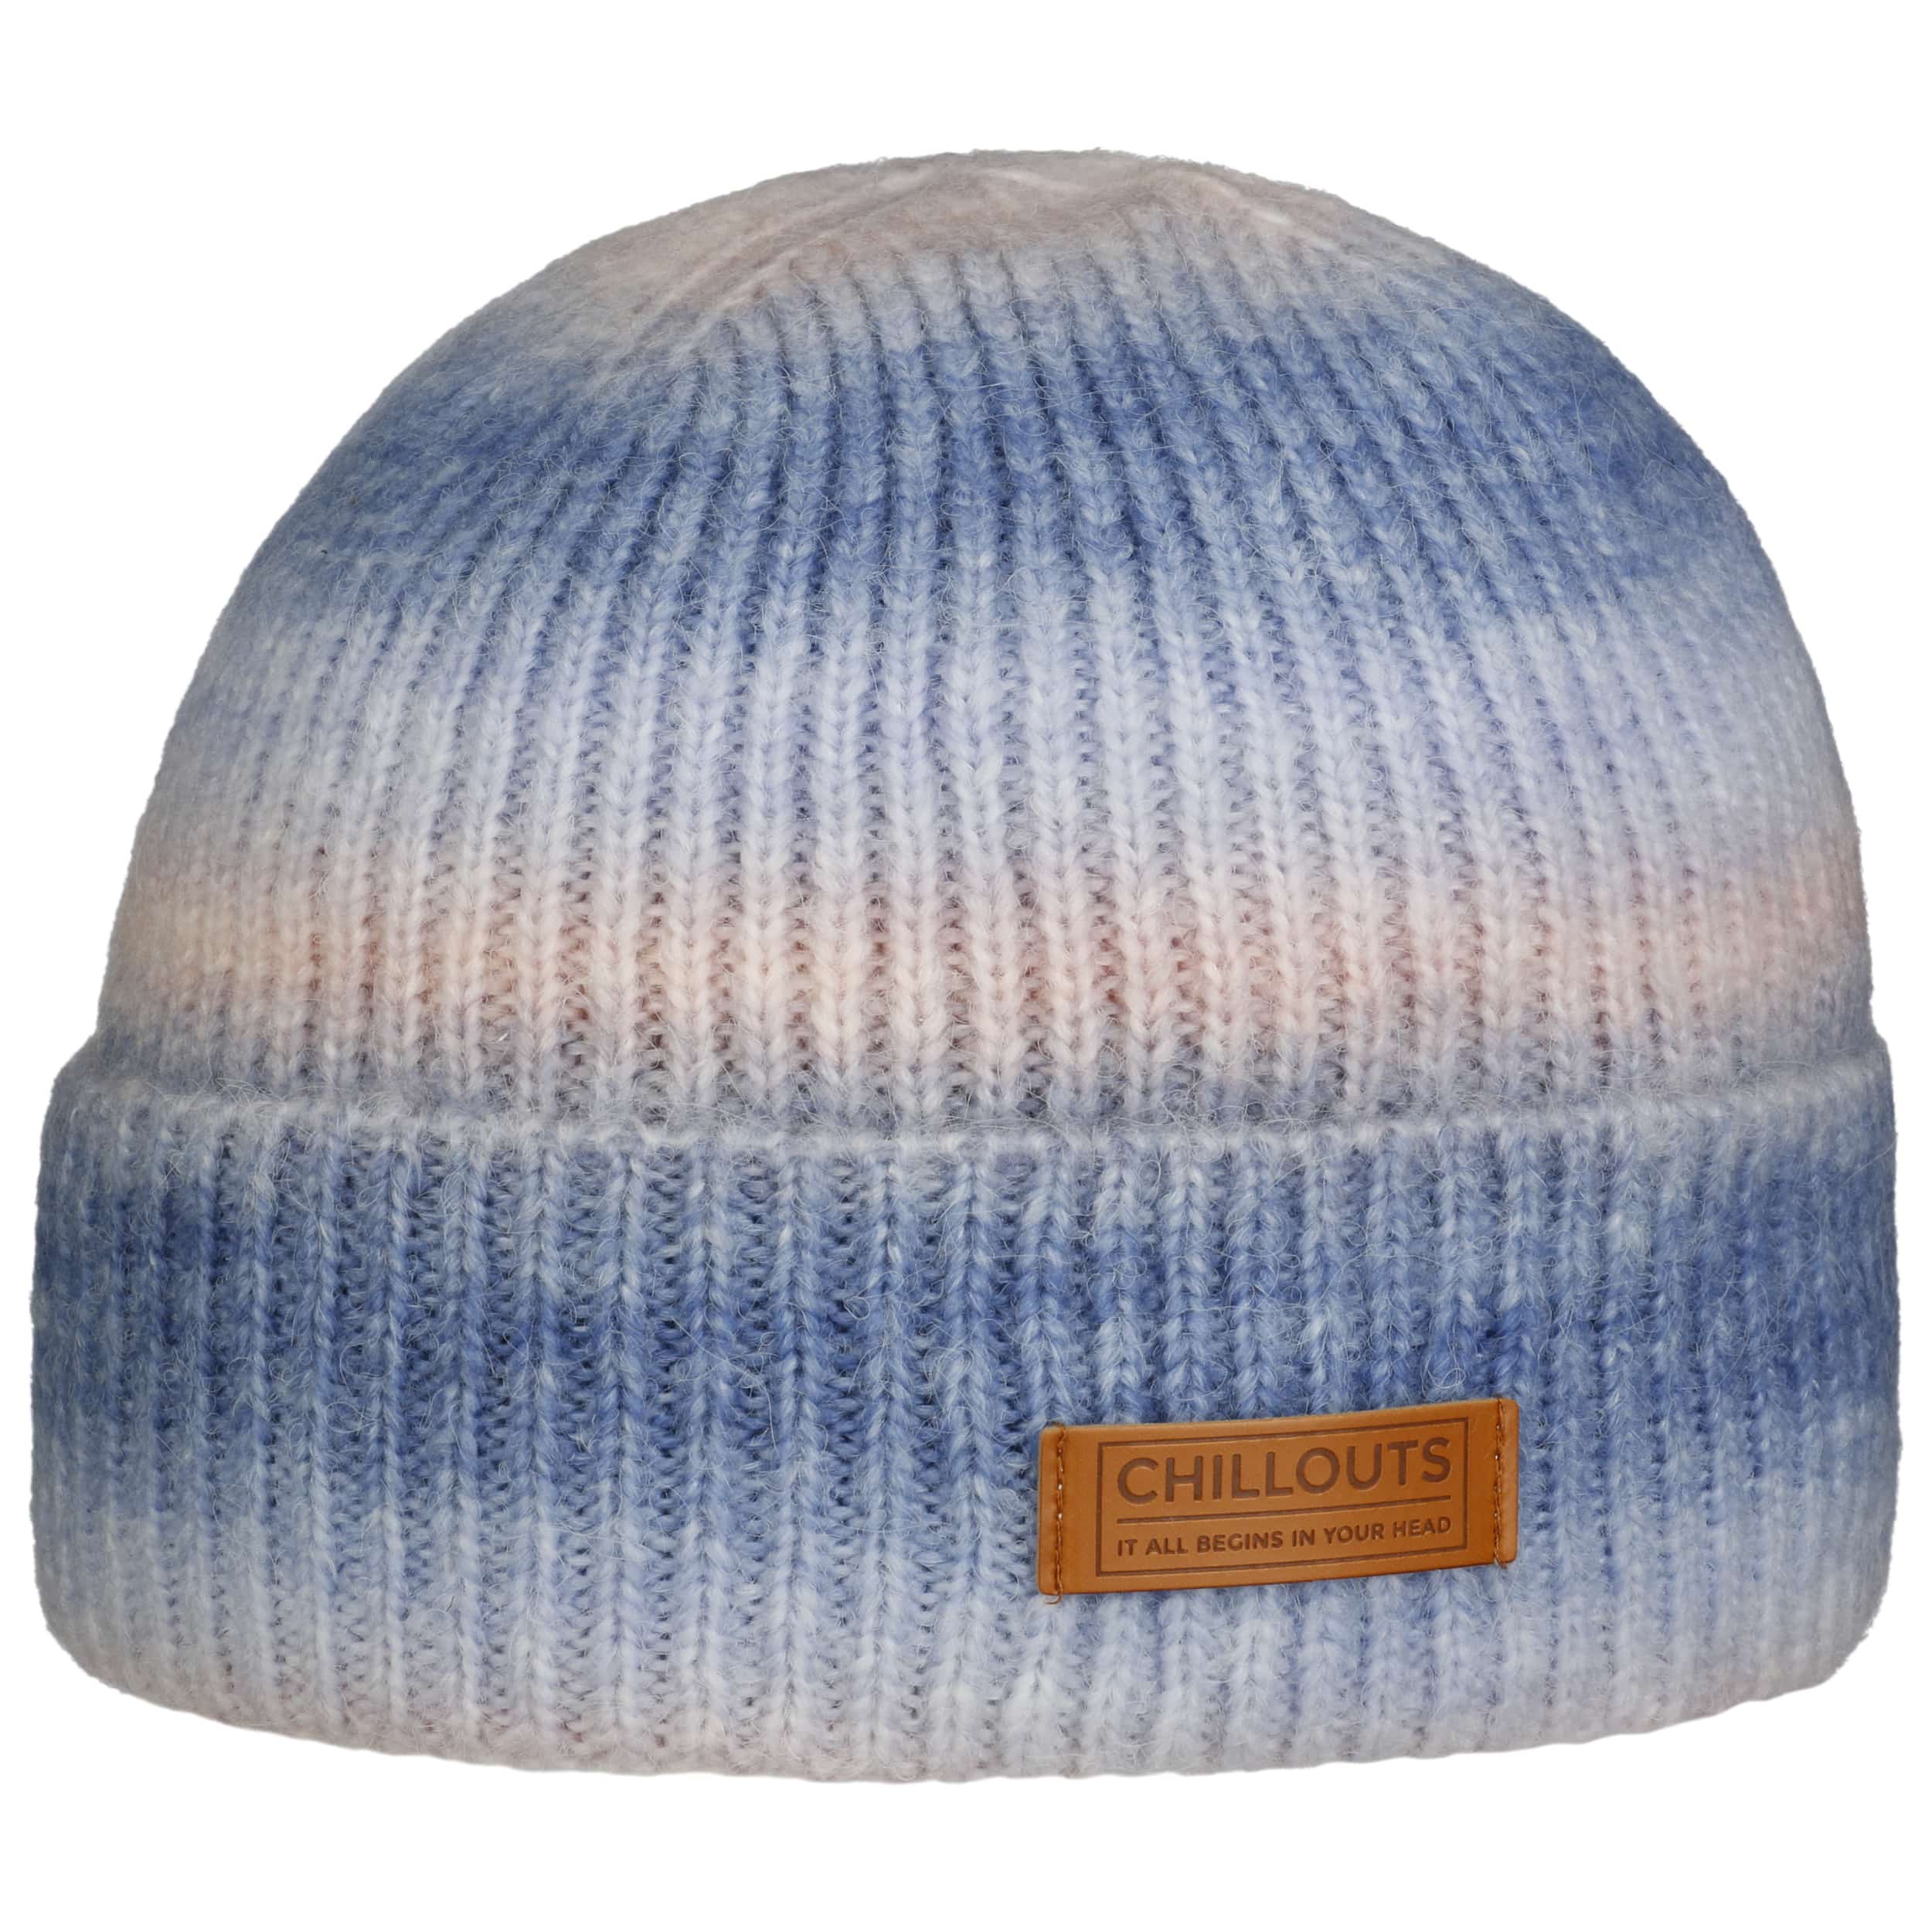 Rainbow Beanie Hat Chillouts £ 23,95 by 